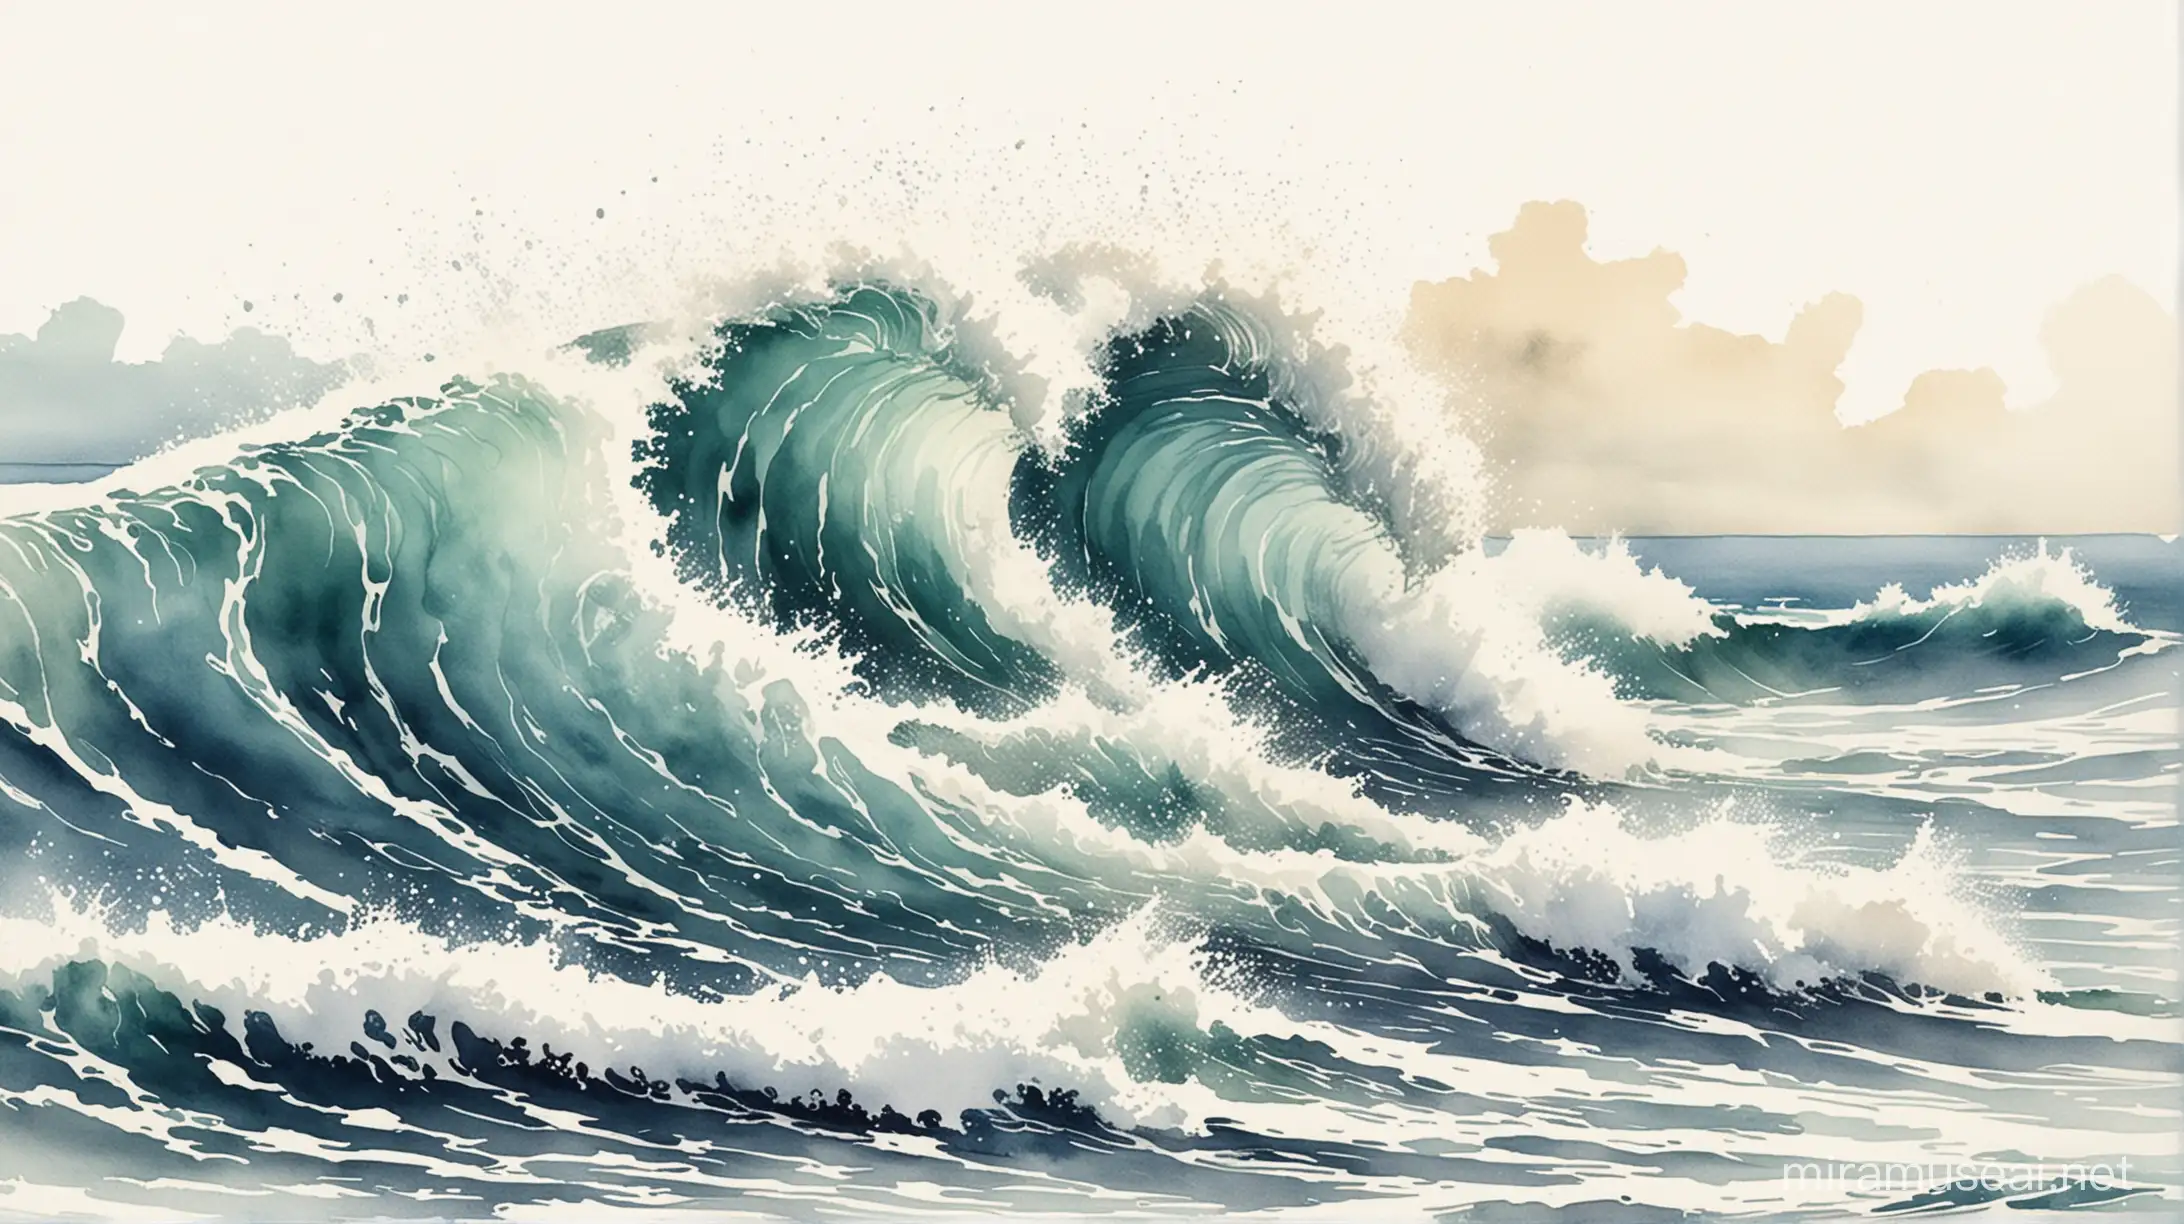 Retro Watercolor Painting of Breaking Sea Wave on White Background